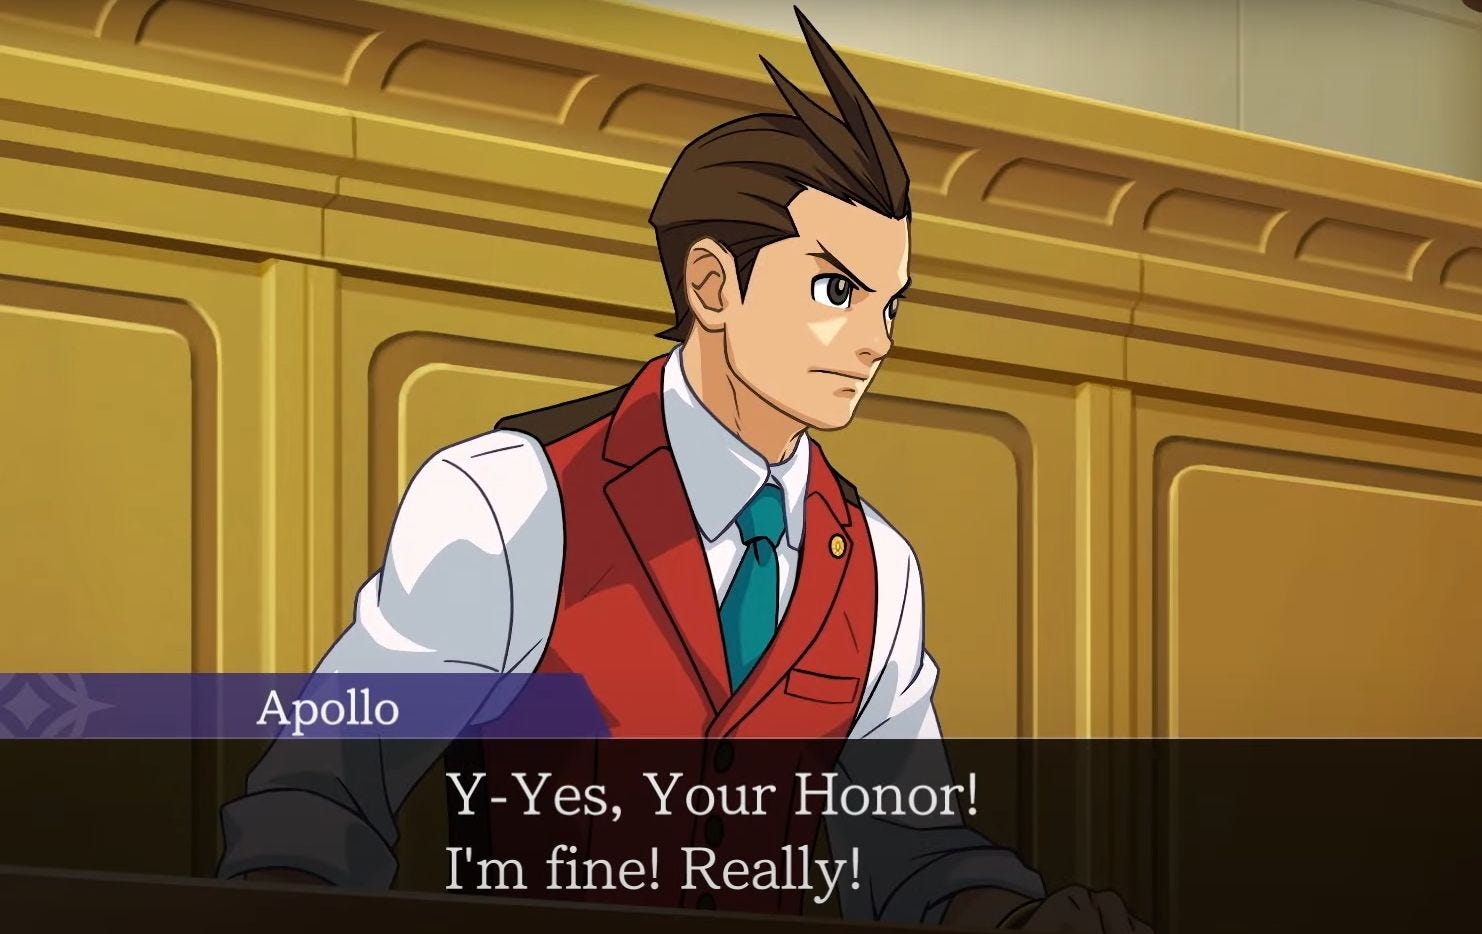 Apollo Justice: Ace Attorney Trilogy will make its PC debut next January